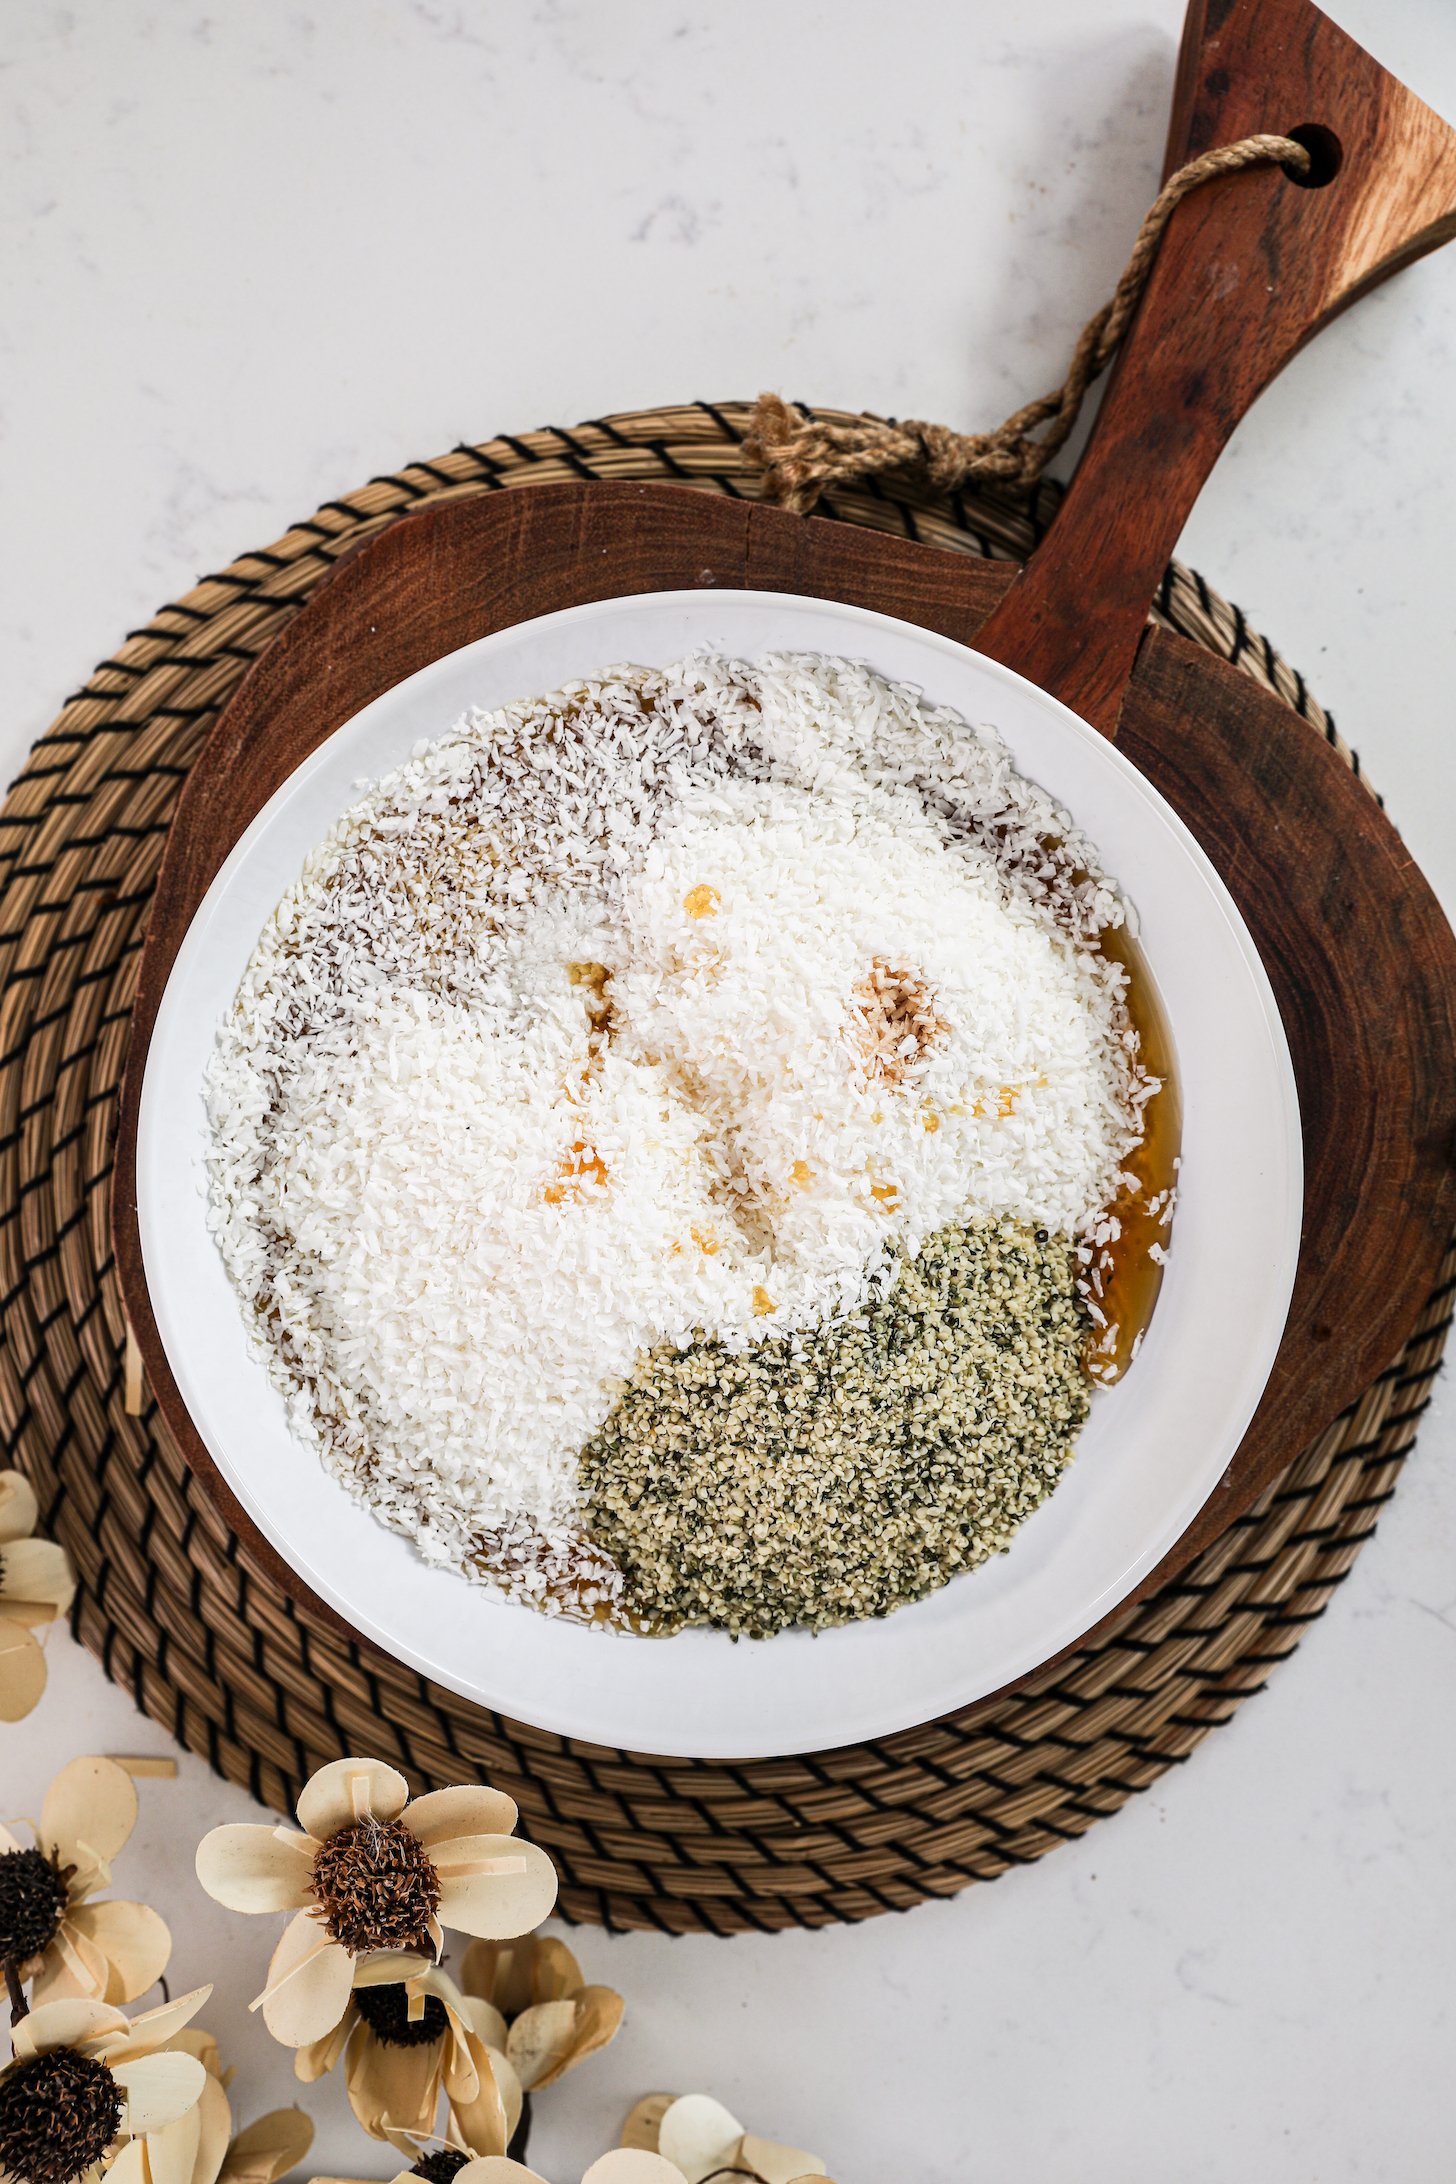 A bowl containing shredded coconut, hemp seeds, vanilla and maple syrup.